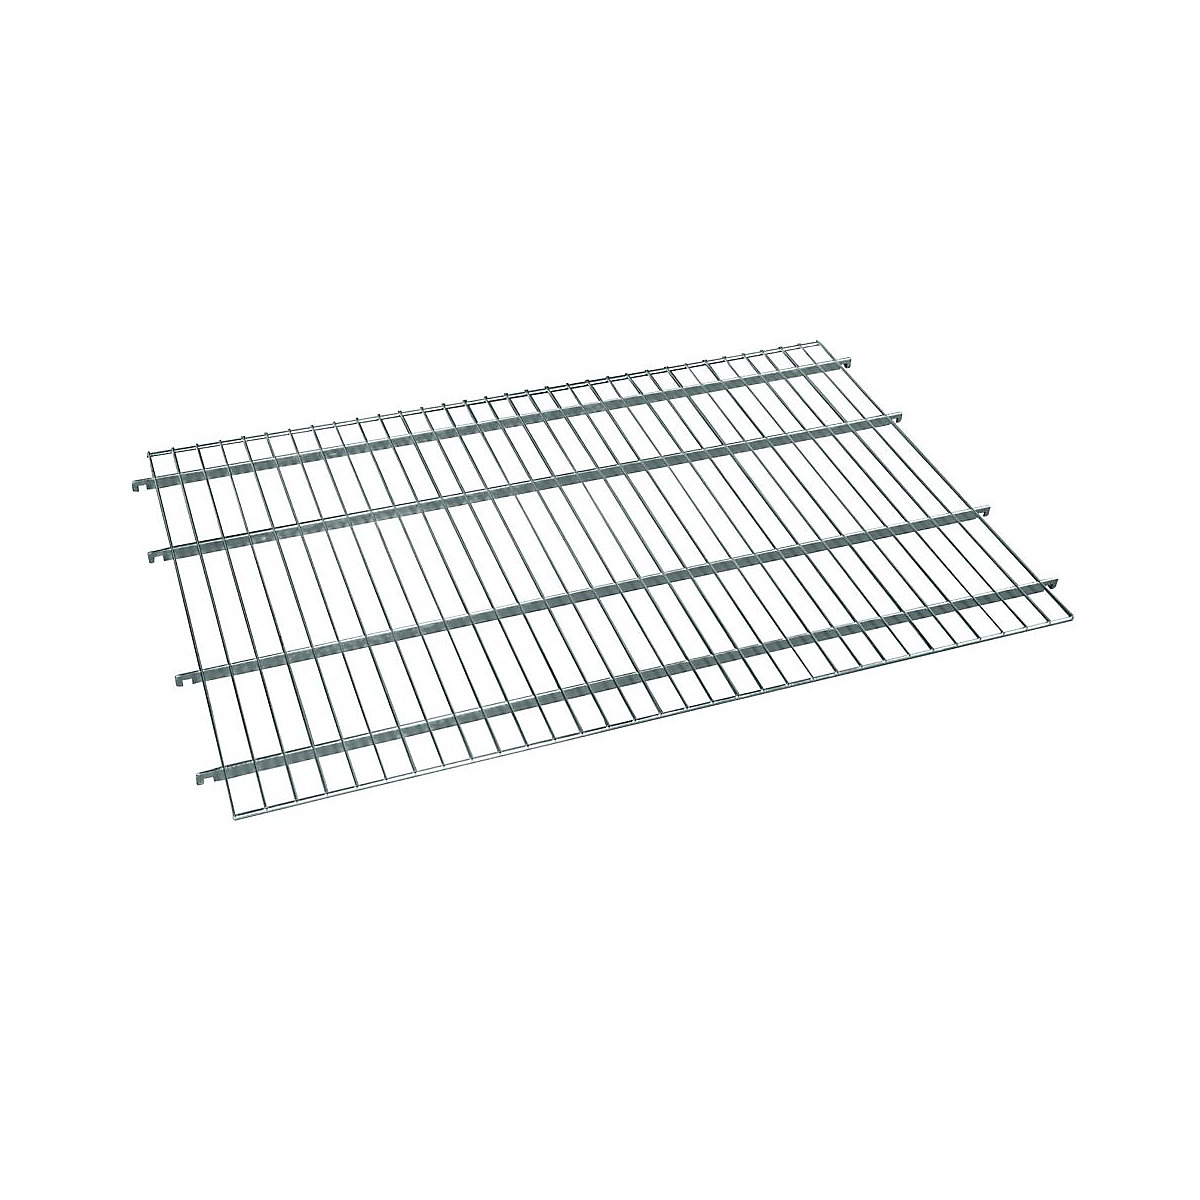 Intermediate shelf for steel roll container, for WxD 640 x 460 mm, without raised edges